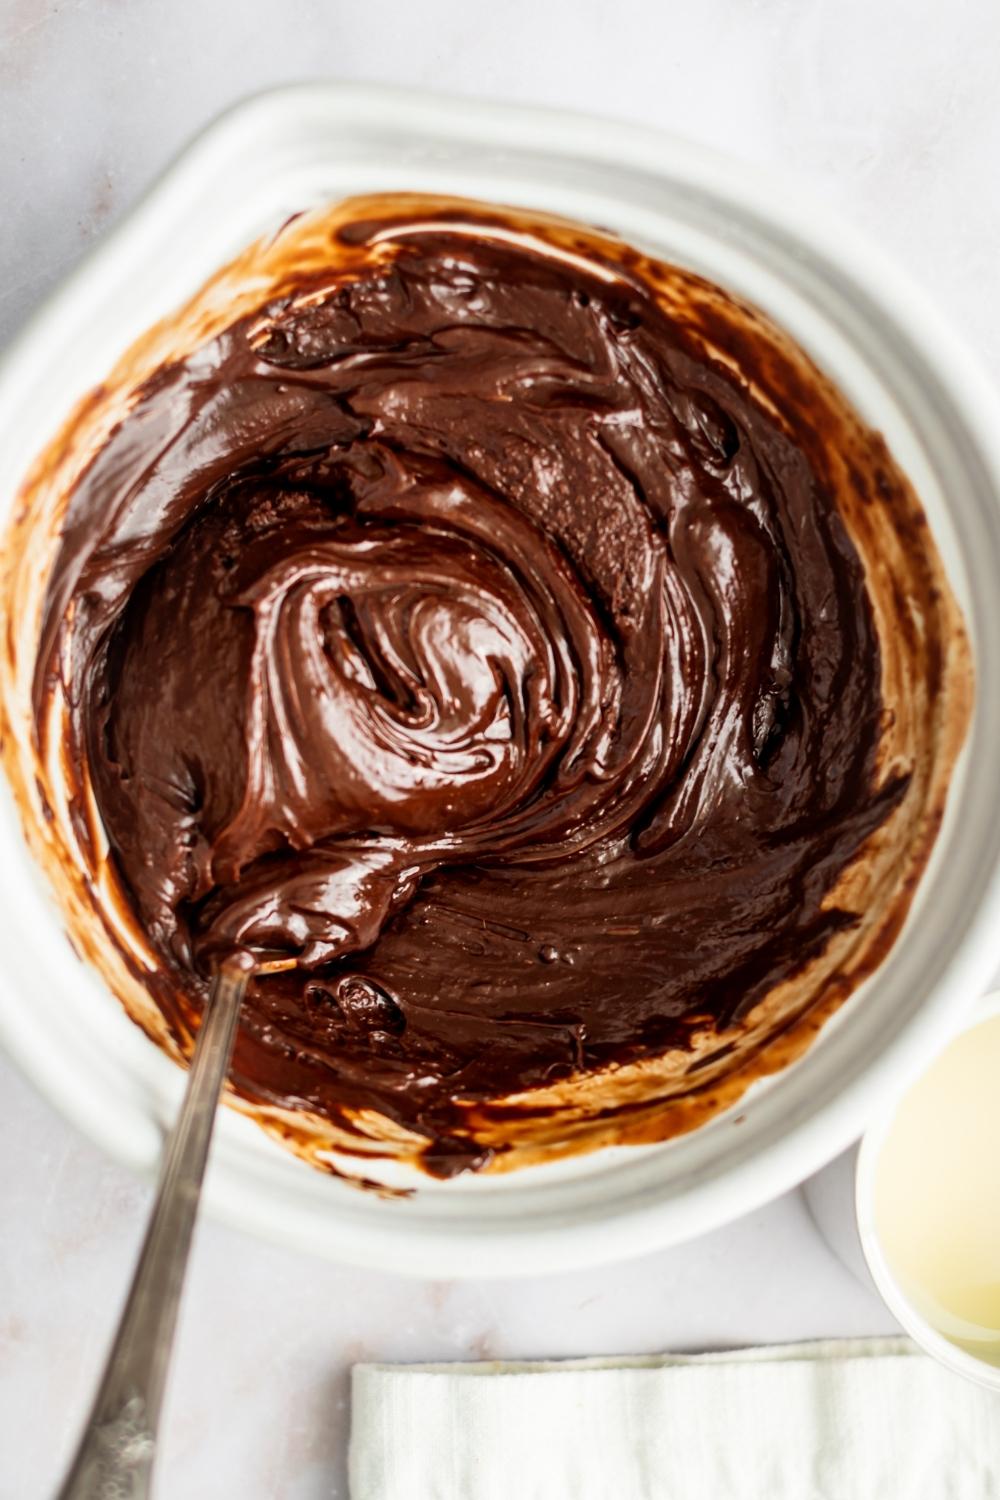 A mixing bowl containing melted chocolate and the ingredients needed for fireball fudge a spoon is mixing it.